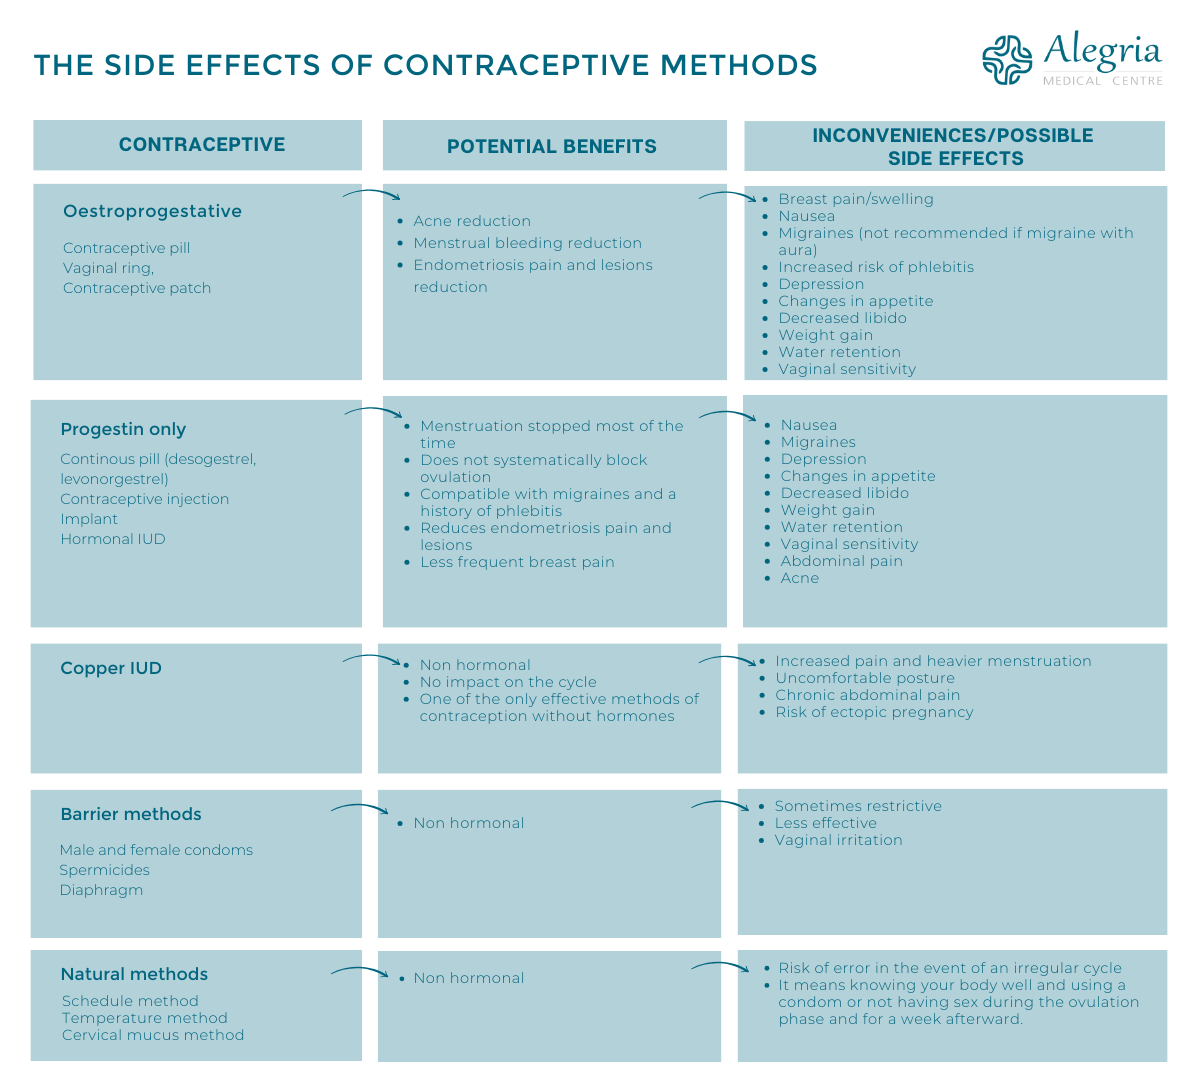 Table comparing contraception methods and their effects